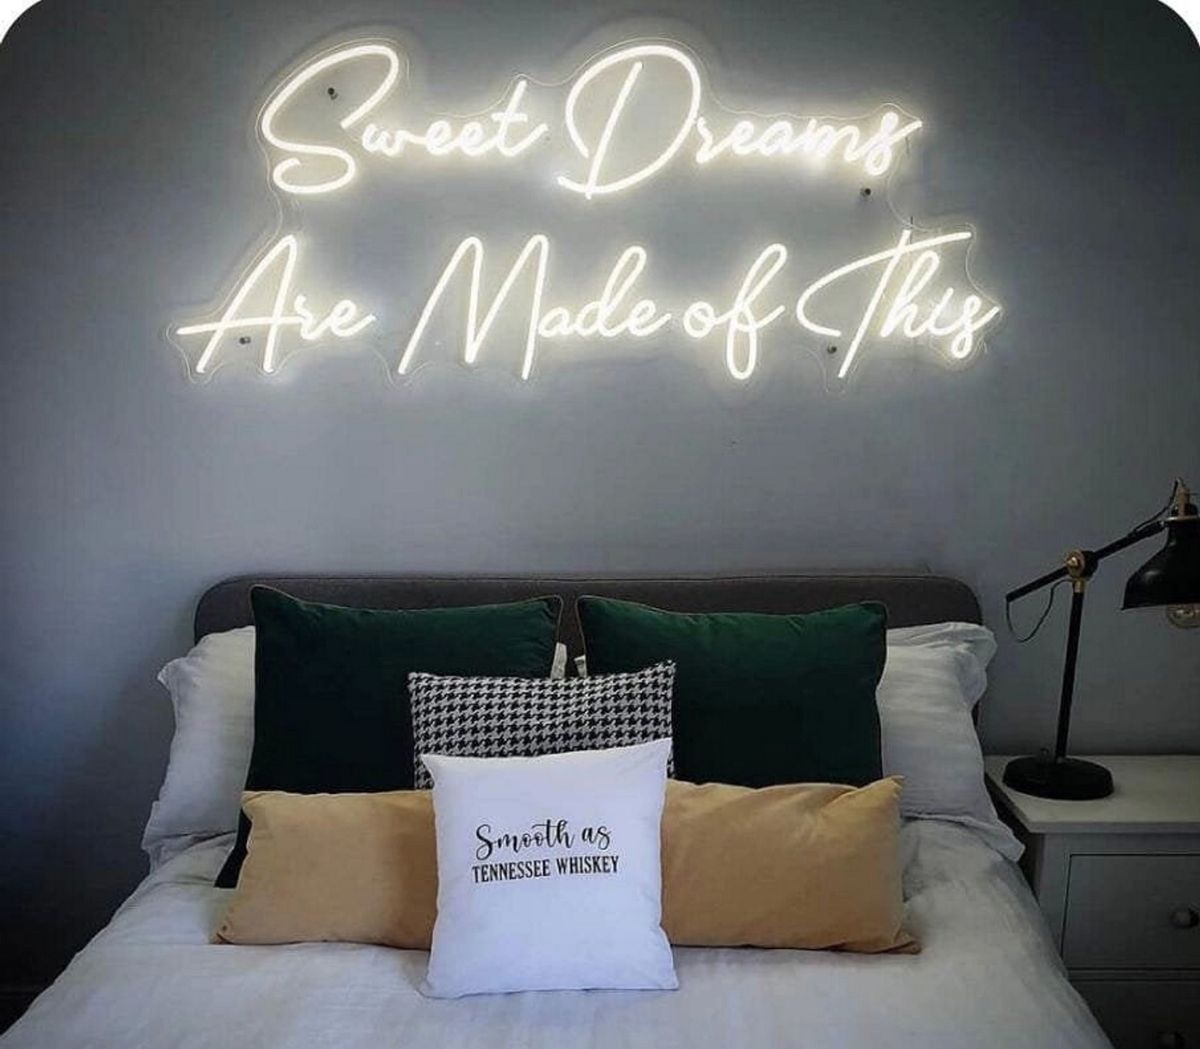 Sweet Dreams with Heart Quote LED Neon Night Light. Bedroom Home